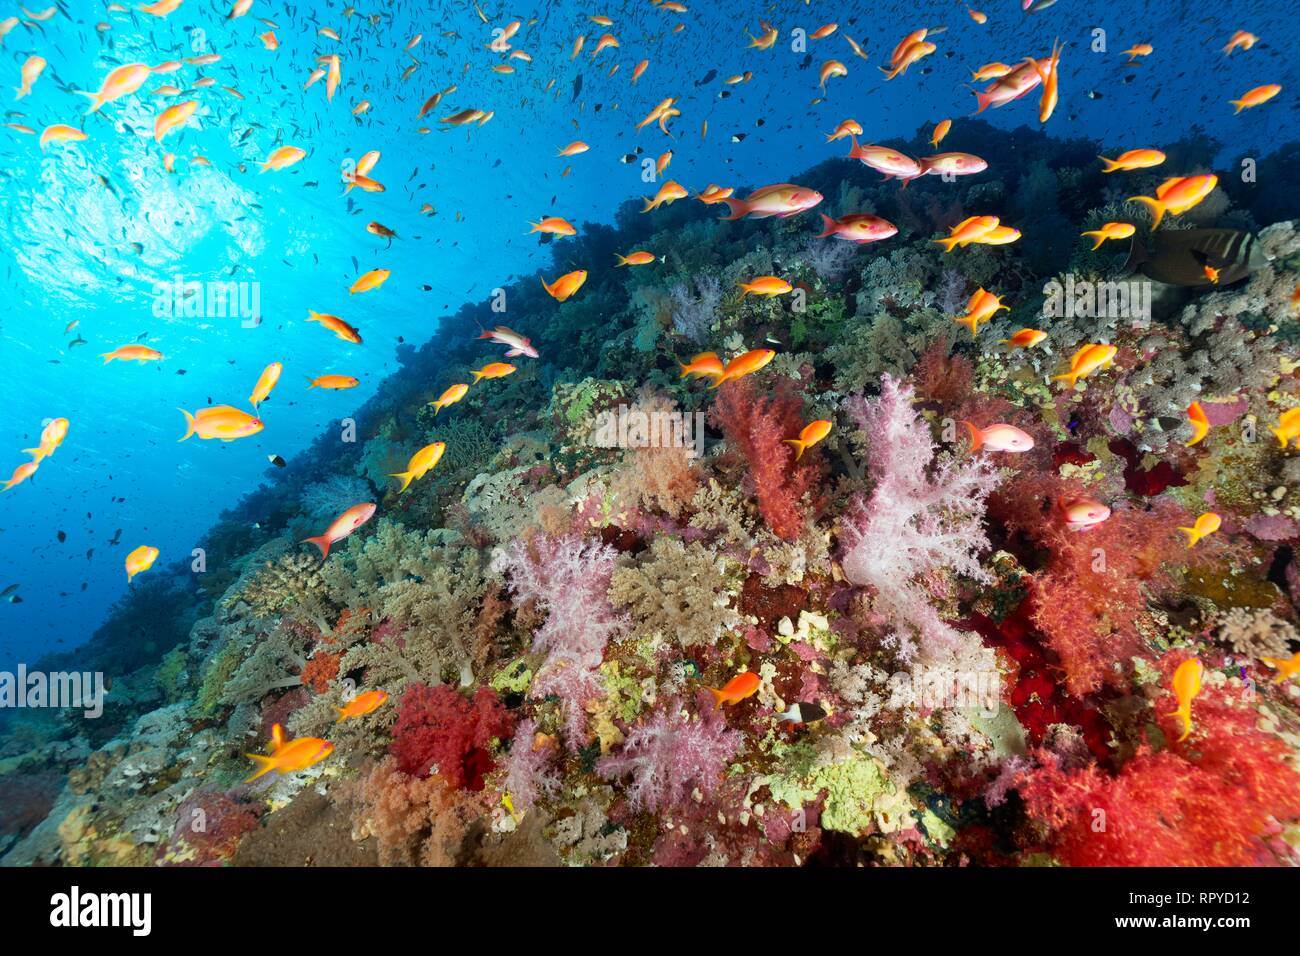 Coral reef, reef waste densely overgrown with many different Soft corals (Alcyonacea), stony corals (Scleractinia) and Anthias Stock Photo